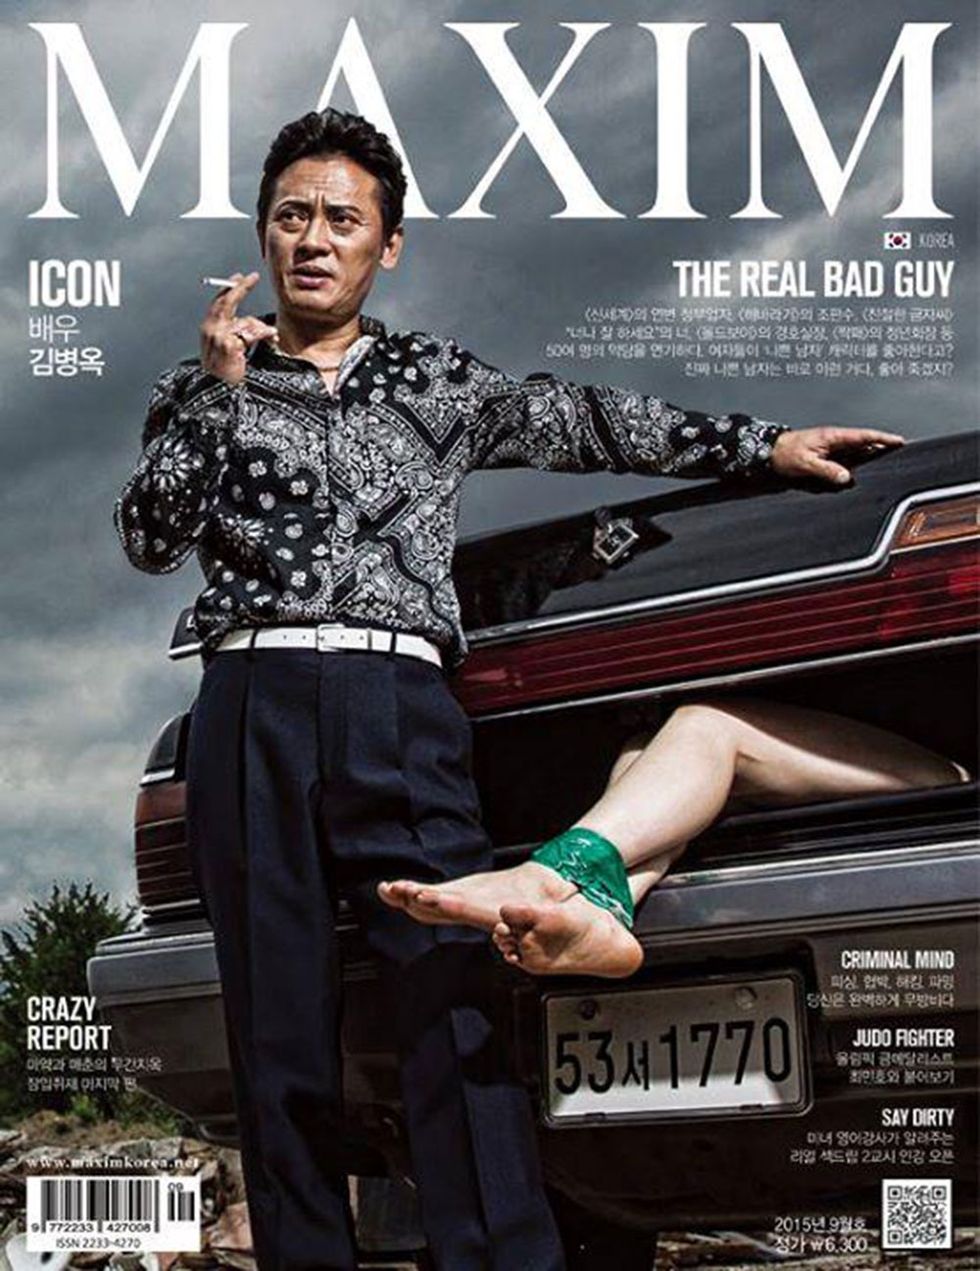 Korean Maxim features a man posing next to a woman tied up in a car boot